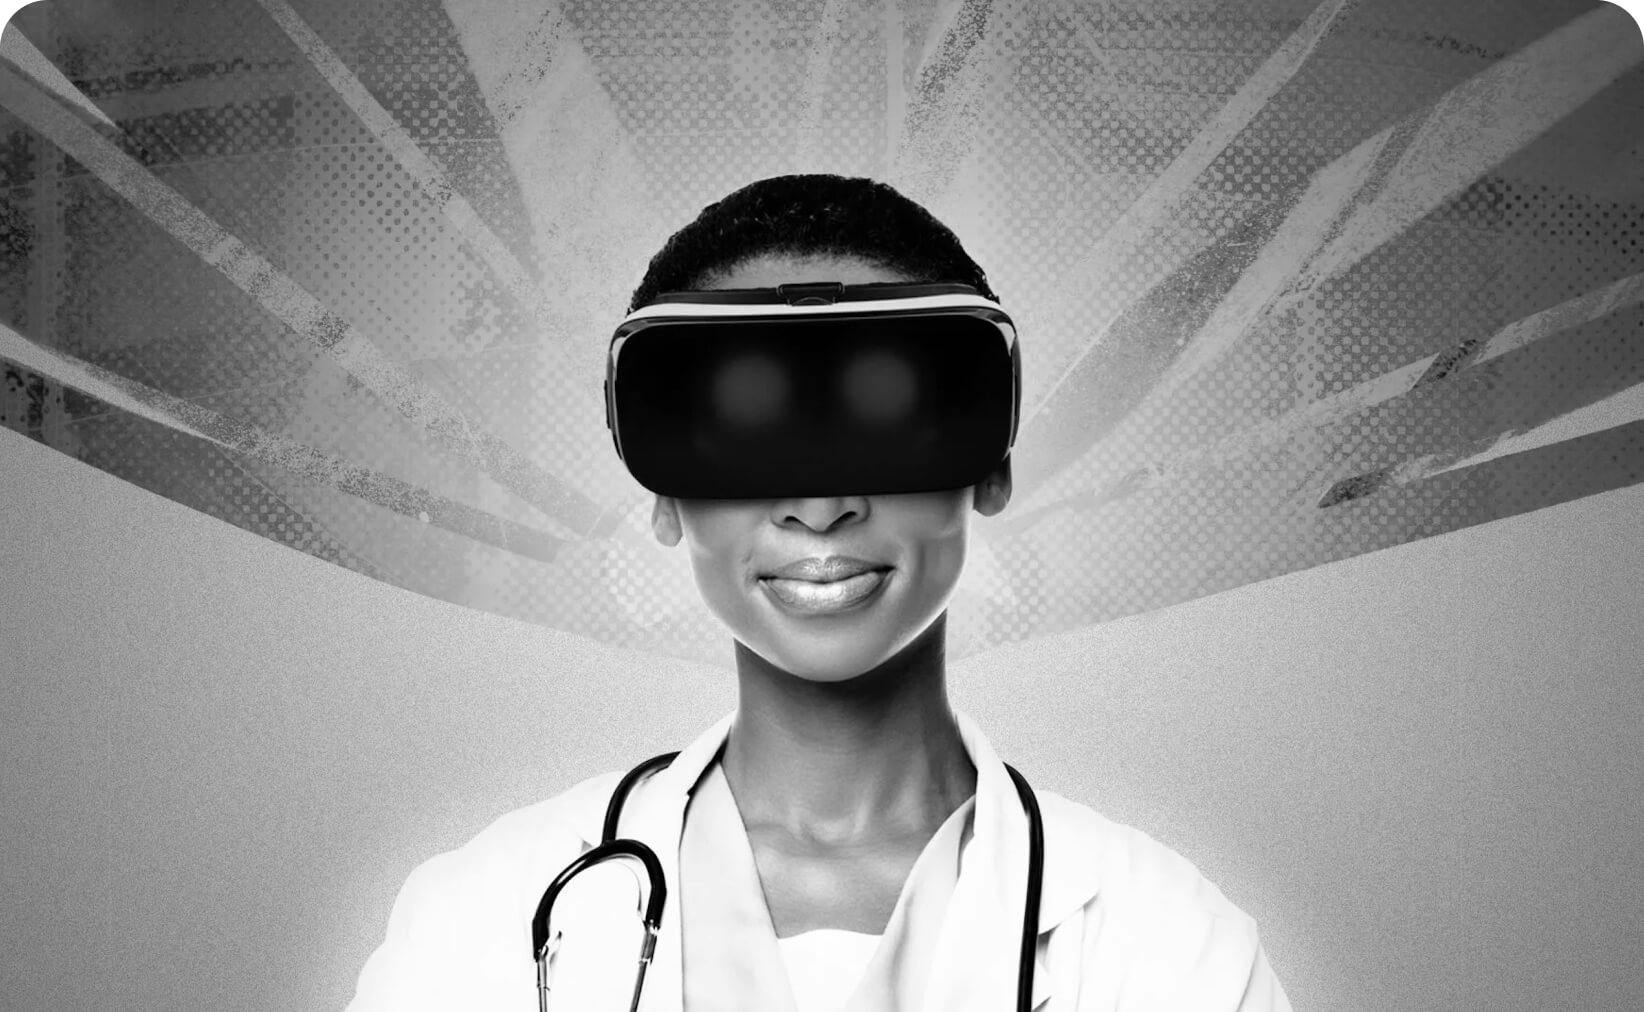 Osso VR nets $66 million for surgical training